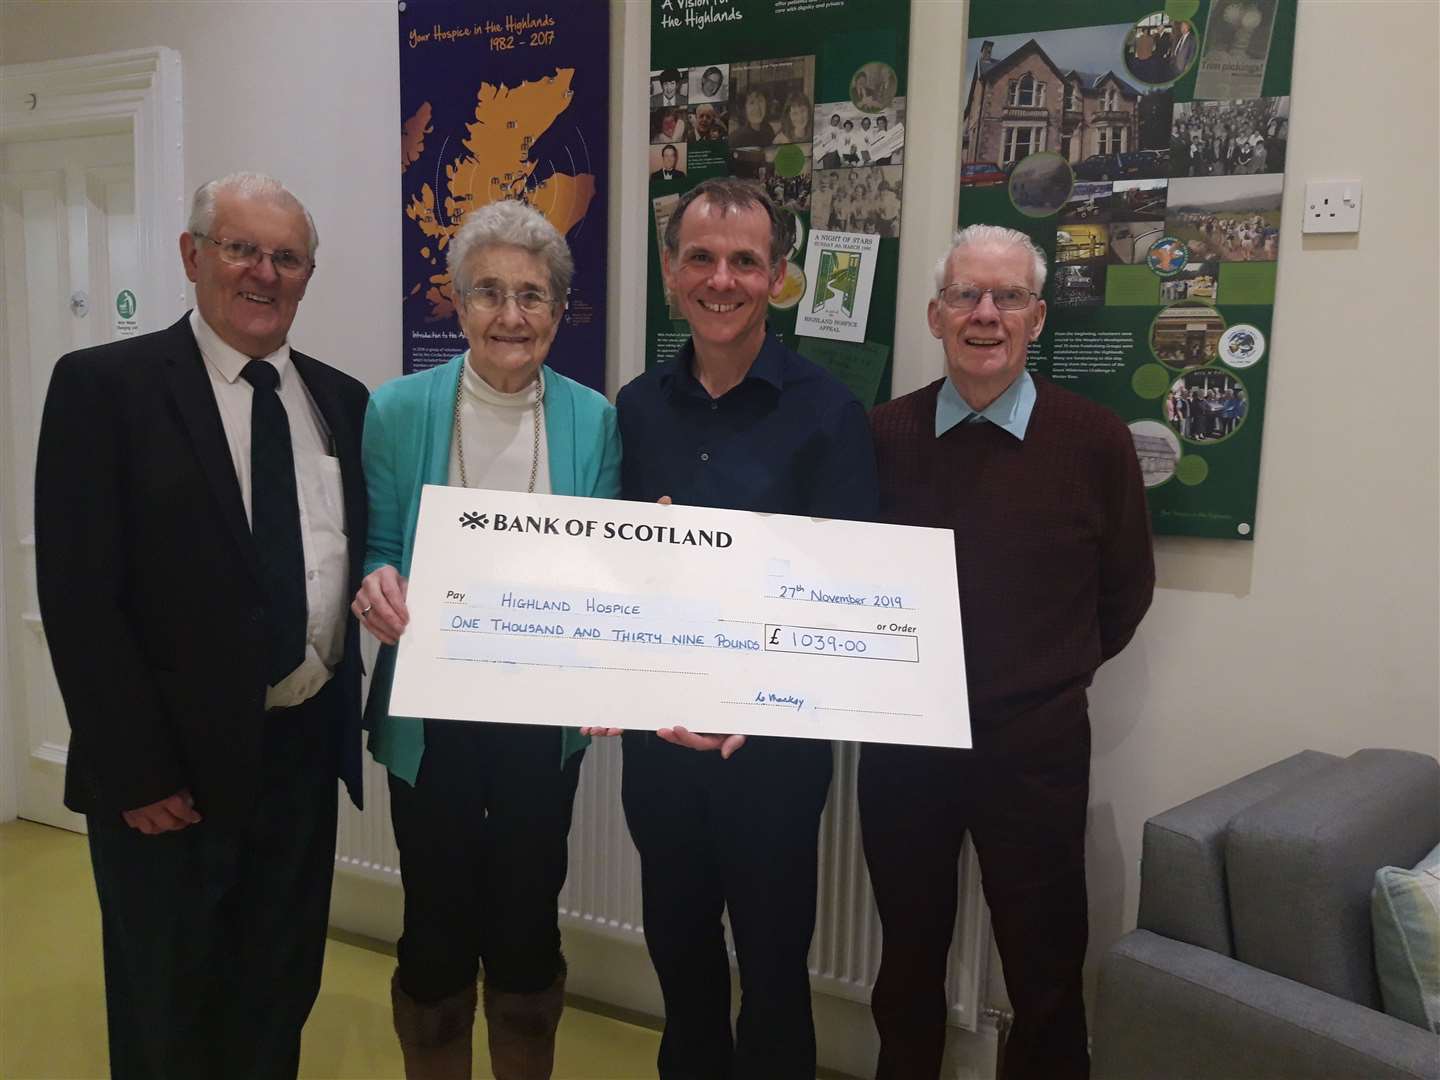 L-R: Buttonbox Gathering compere, John ‘The Prof’ Matheson, Catherine Mackay, Andrew Leaver Head of Fundraising at Highland Hospice, Jim Mackay.